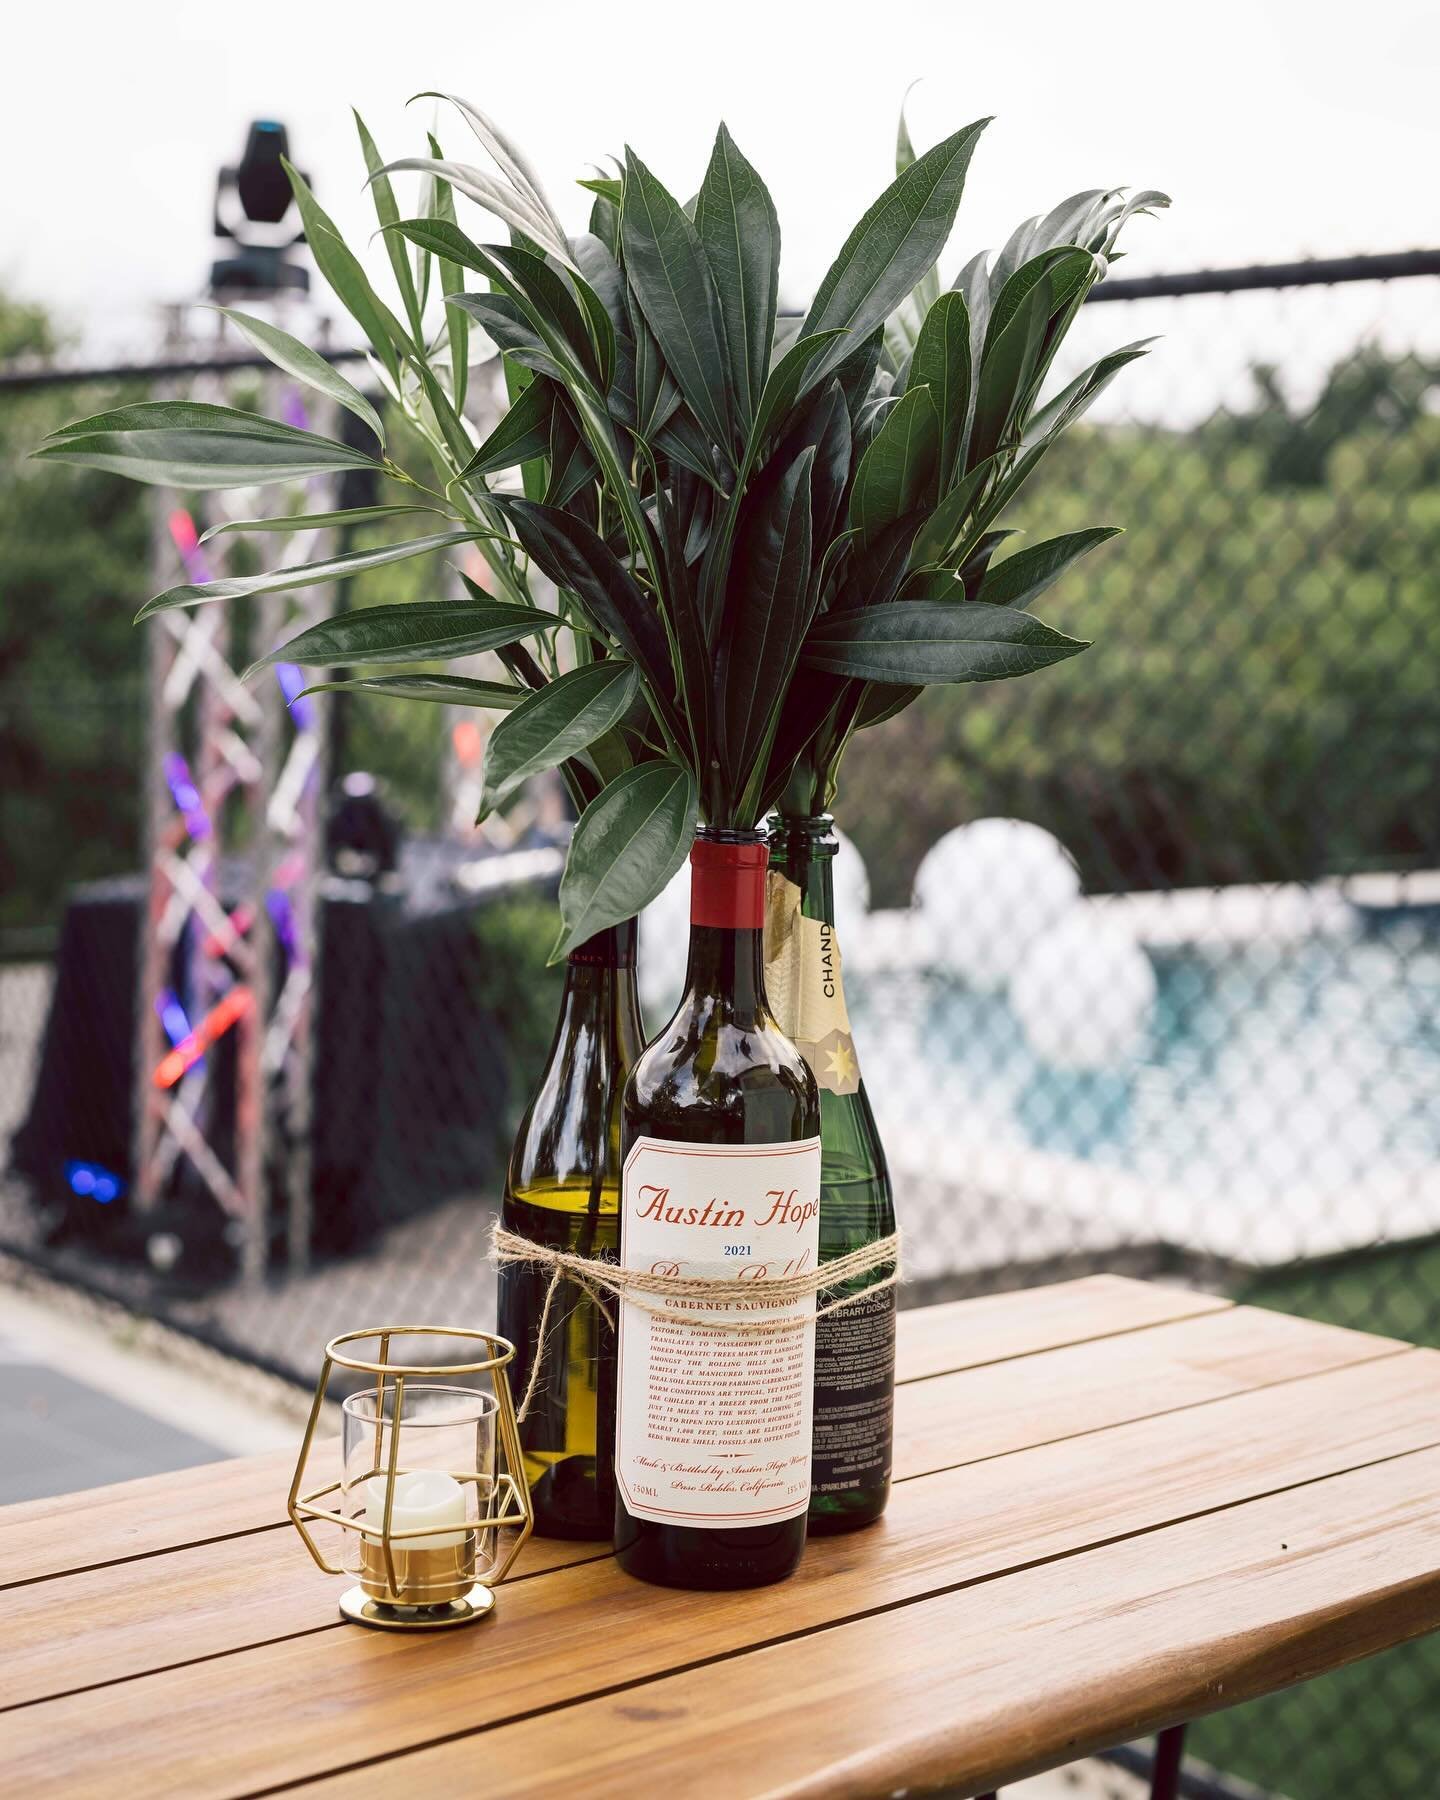 Each empty wine bottle we used for the centerpieces was enjoyed by our clients and kept as a memory of the great time they spent while drinking. Such a meaningful way to bring together an amazing 40th birthday!  #atxeventplanner #austineventplanner #